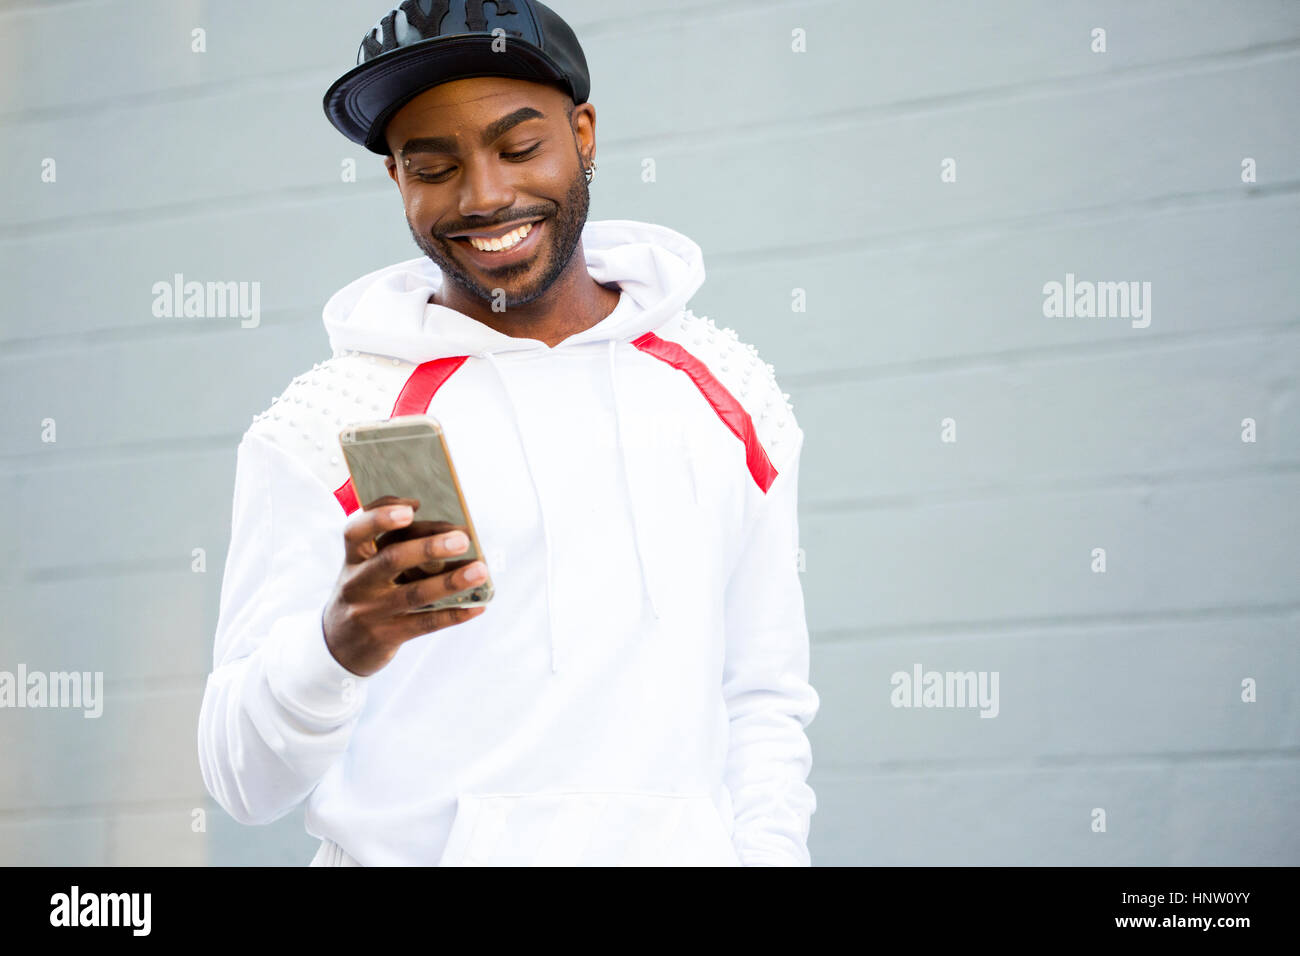 Smiling Black man texting on cell phone Stock Photo